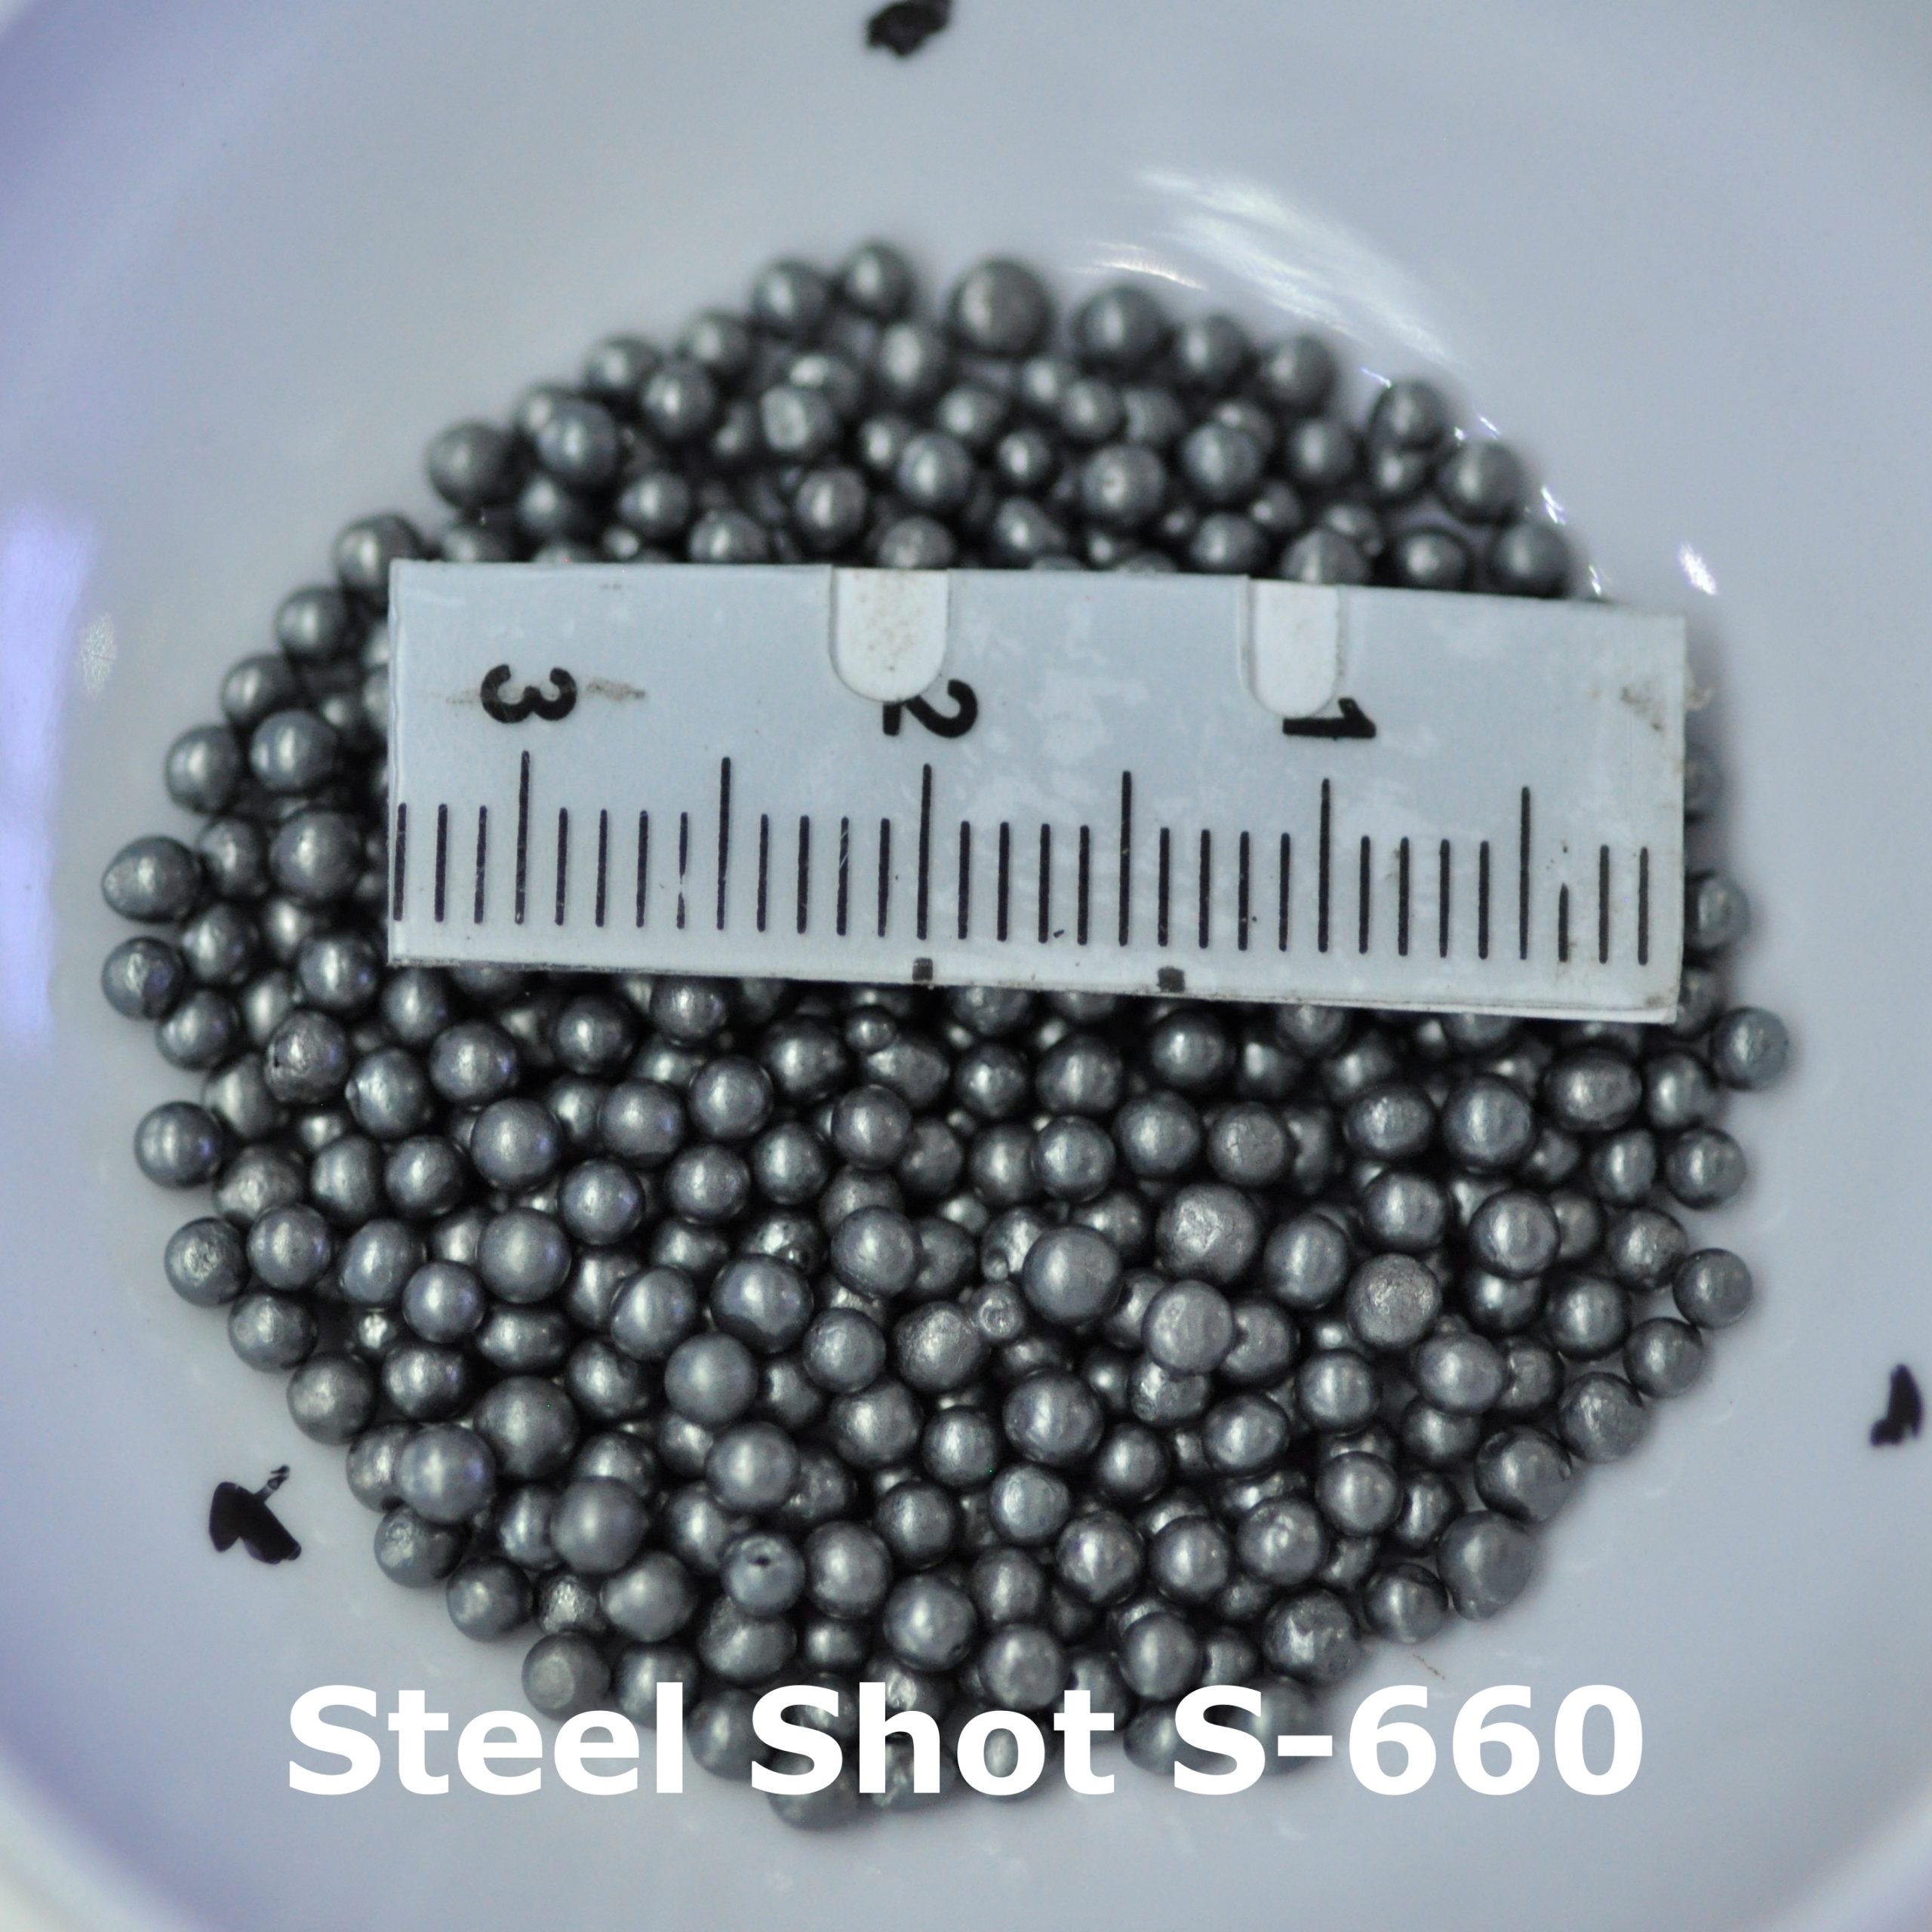 S-660/SH-200
Size 2.0mm